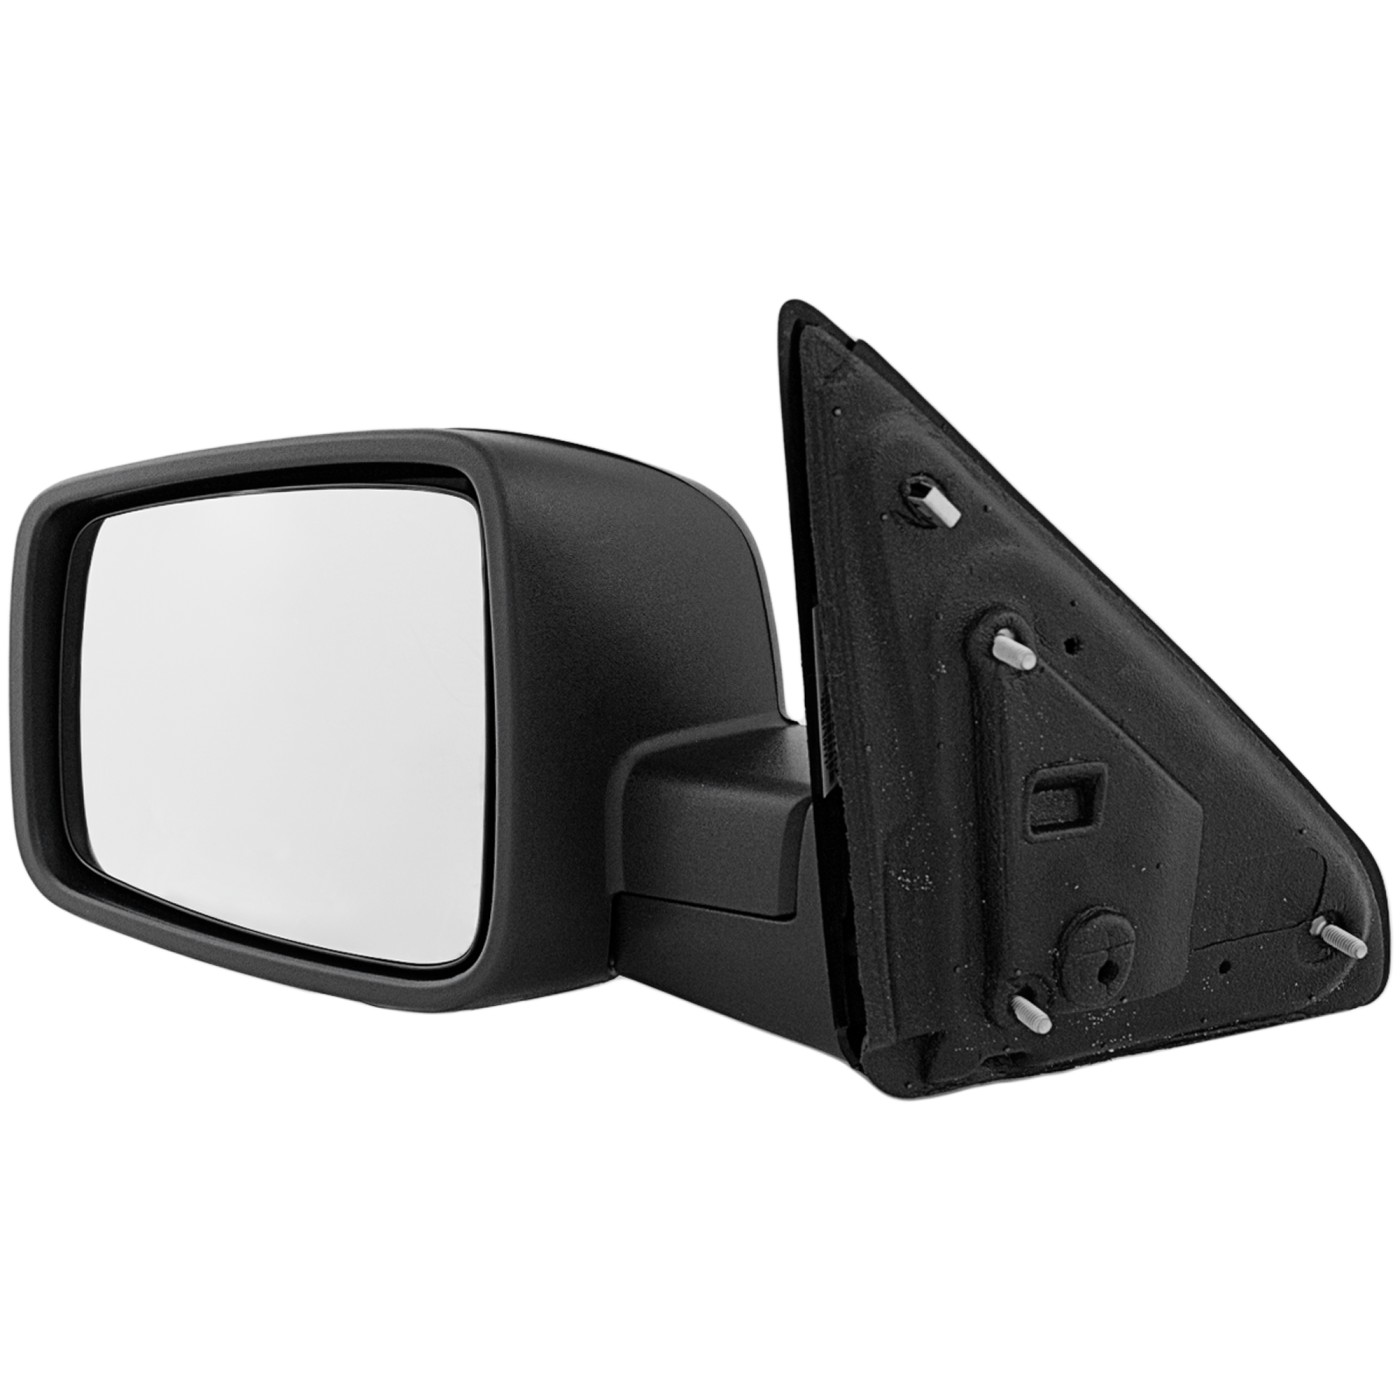 Mirror For 2011-2012 Ram 1500 2500 2009-2010 Dodge Ram 1500 Front Driver Side | eBay 2010 Dodge Ram 1500 Driver Side Mirror